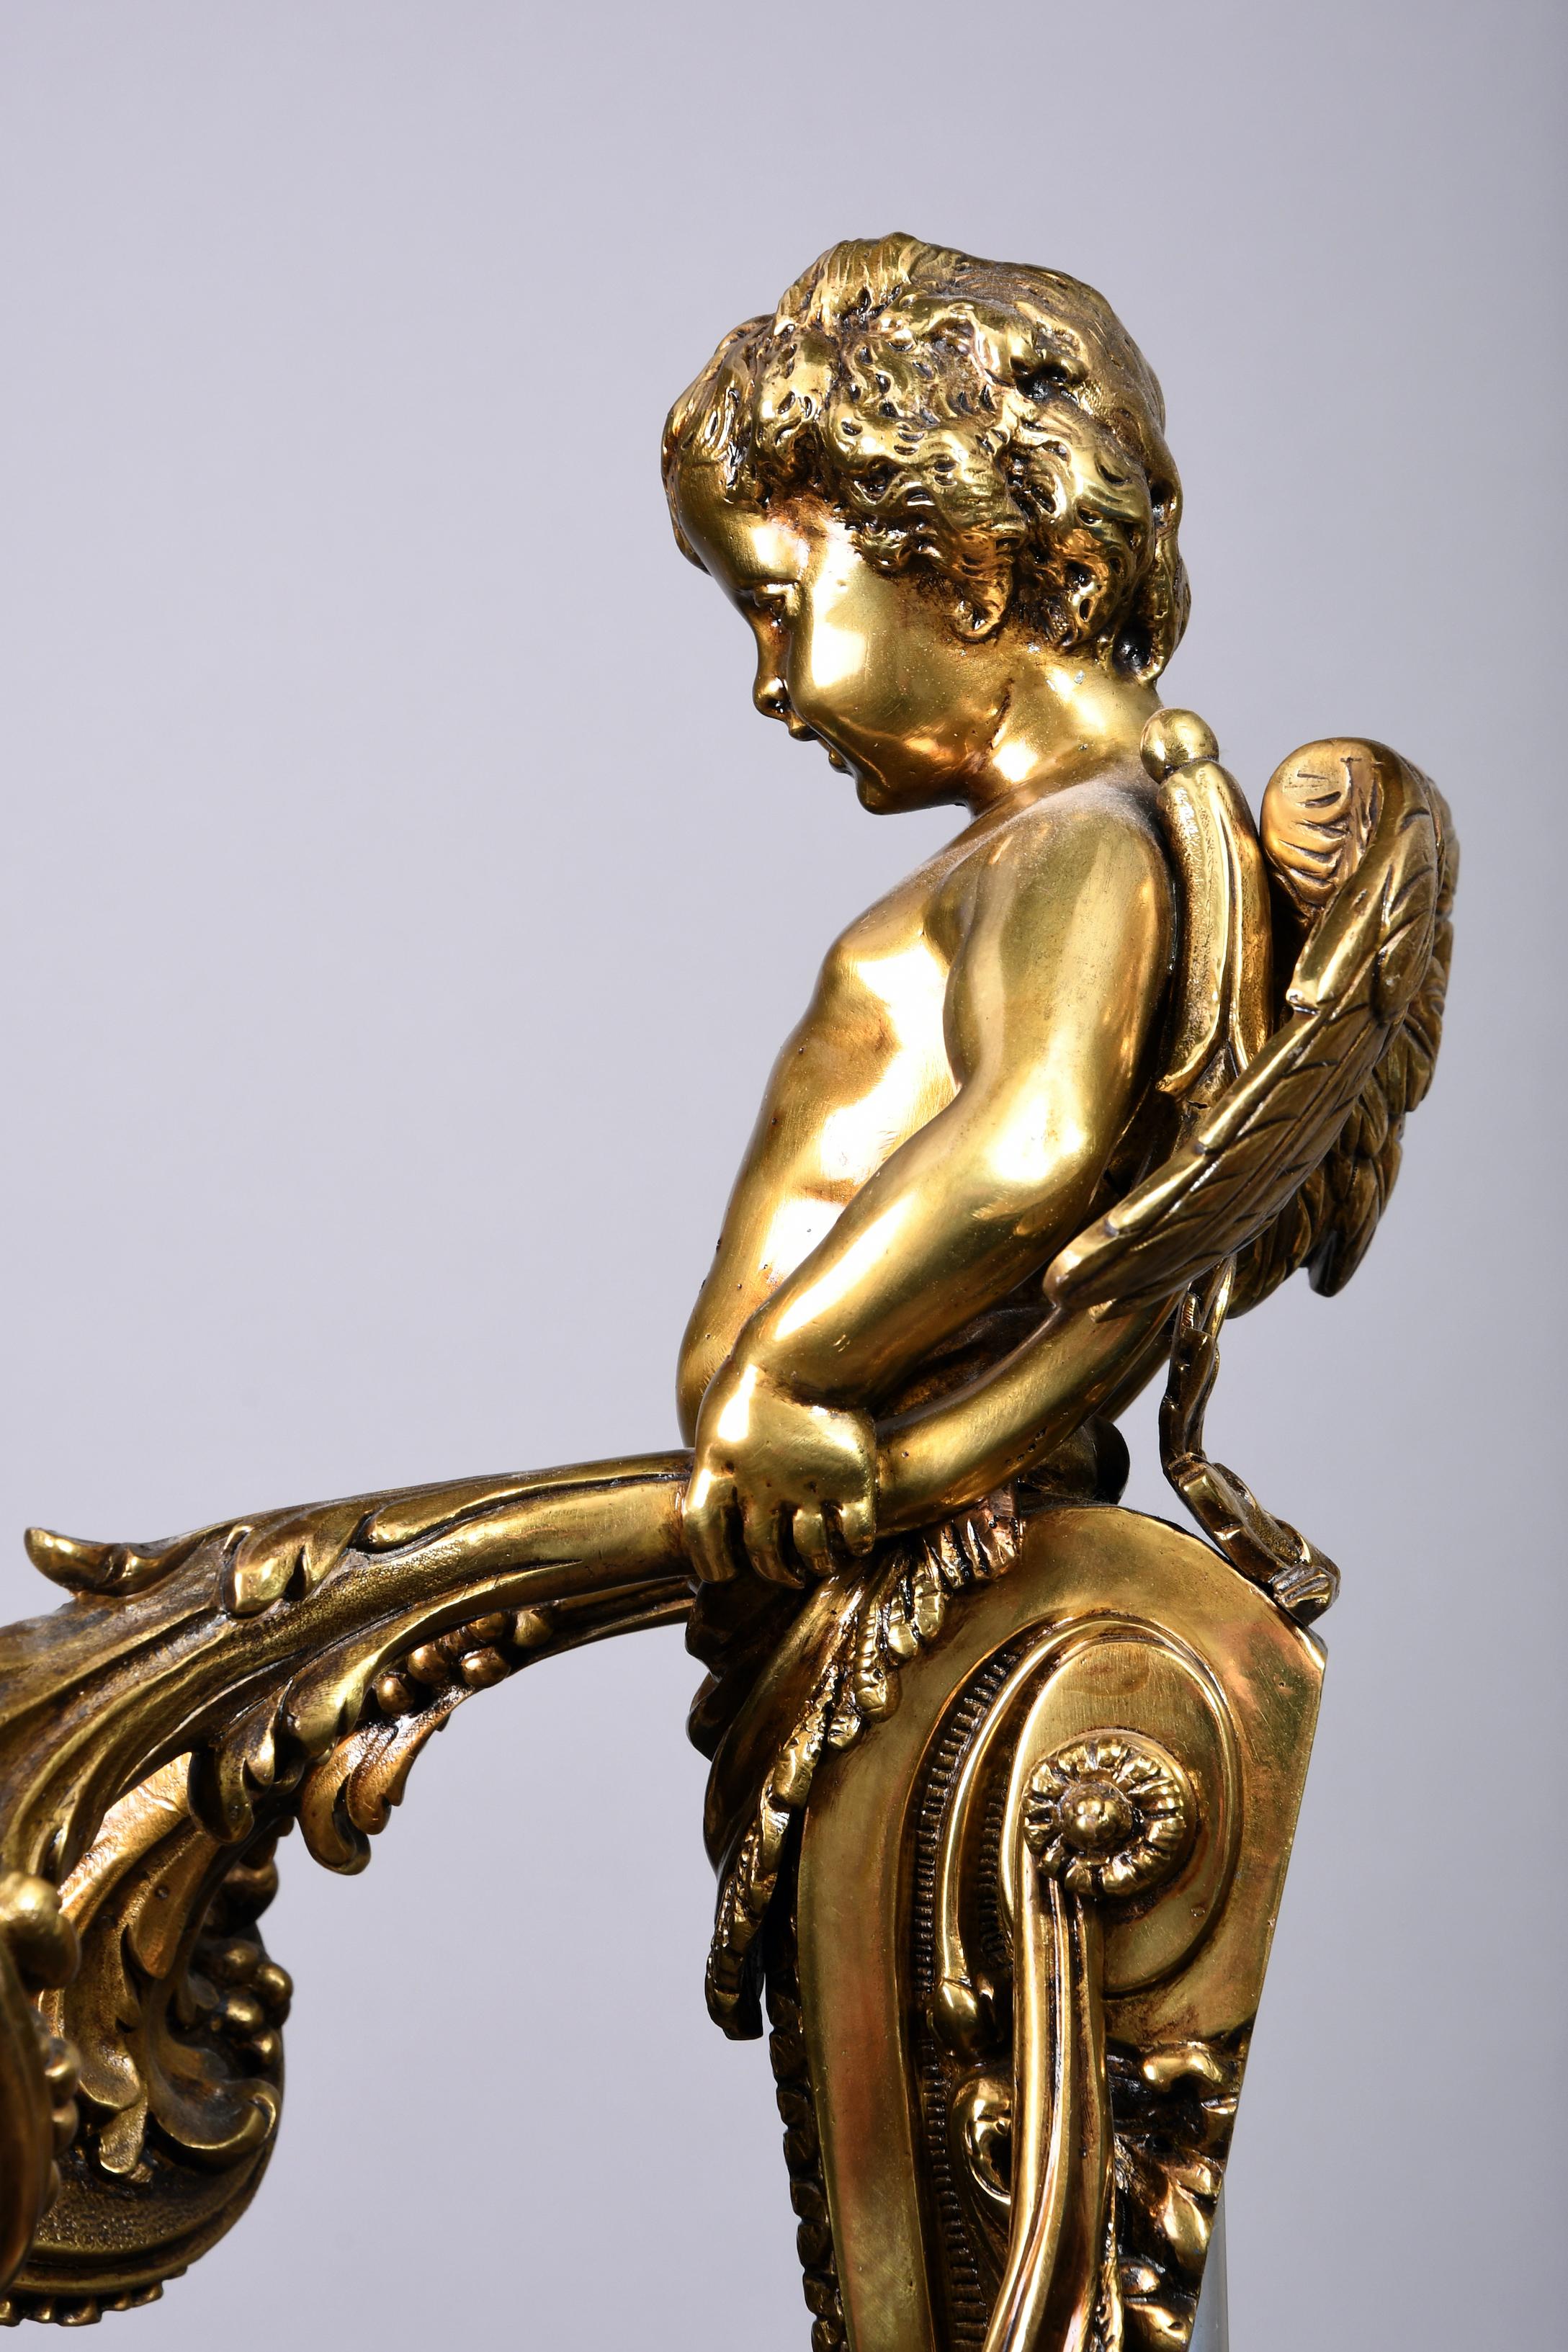 Pair of heavy solid bronze electrical sconces with a relieve decoration of acanthus leaves and swags that stand out the very shiny surface of the bronze. Very well done highlighted feathers originate from the back of the cherub. From the hands of